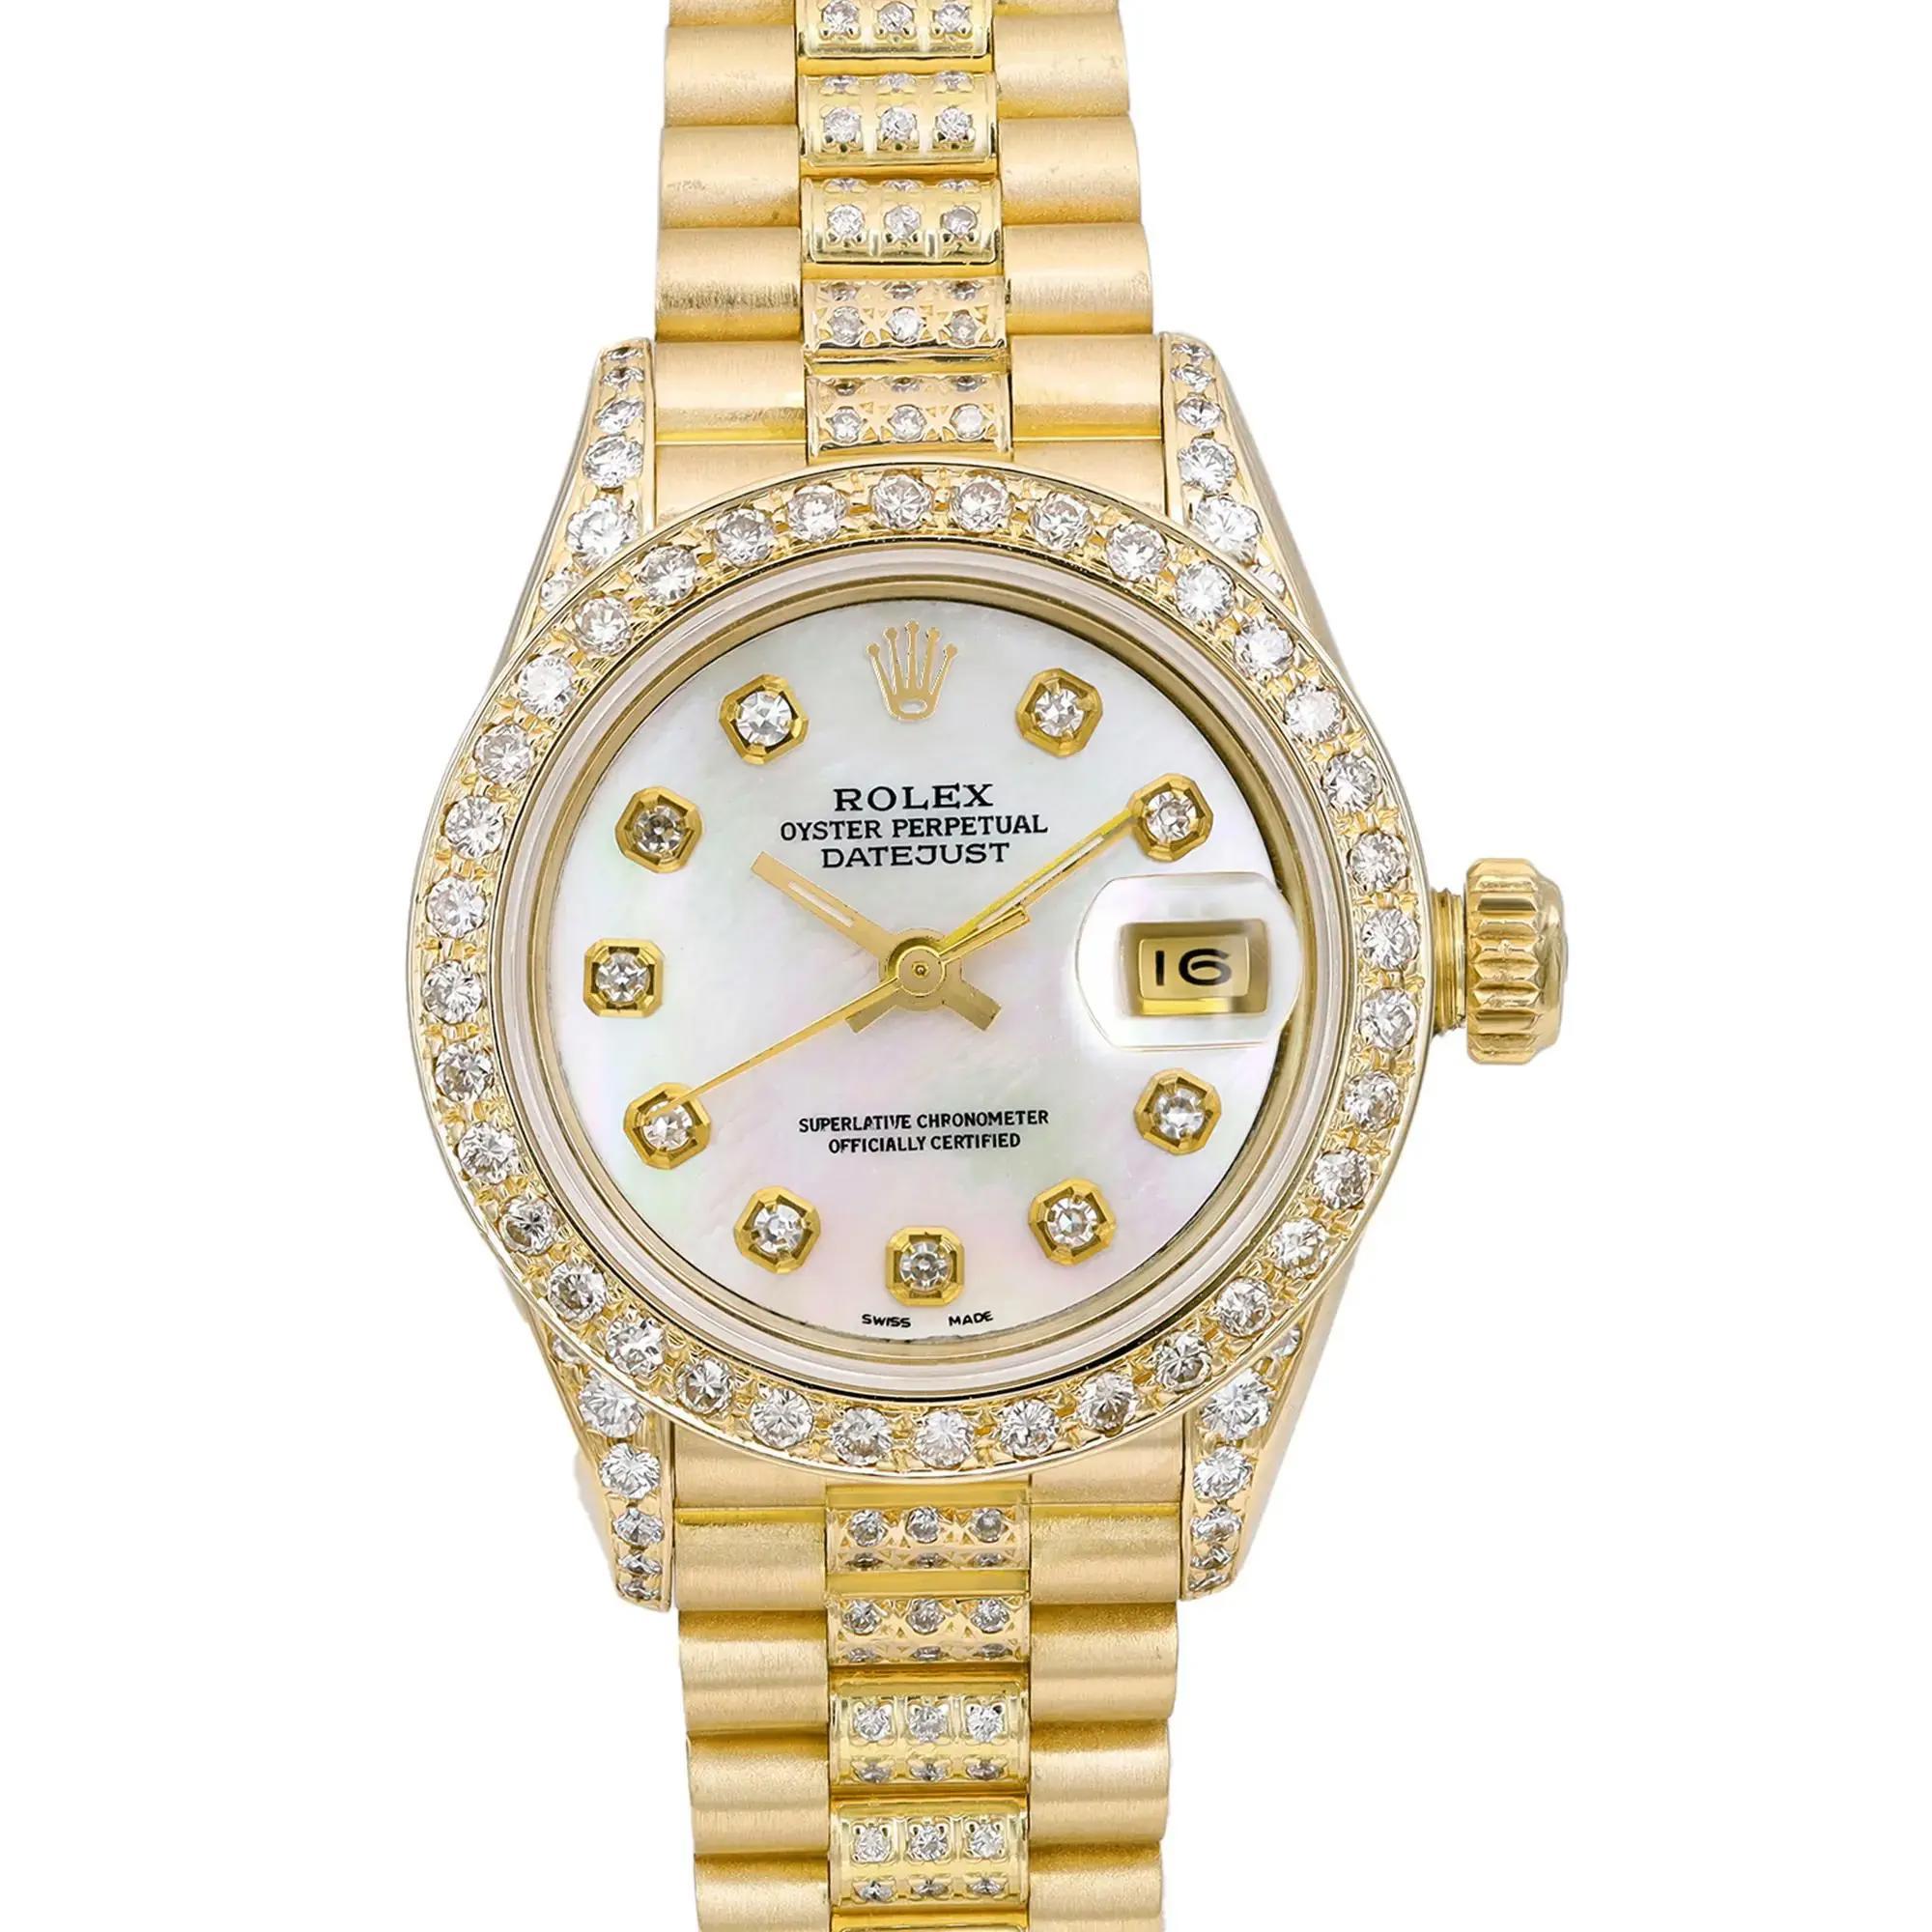 Pre-owned. This timepiece was produced in 1993. Custom diamond bezel custom Dial. Diamonds on the lugs and on the band are also customized. 

* Free Shipping within the USA
* Two-year warranty coverage
* 14-day return policy with a full refund. 
*